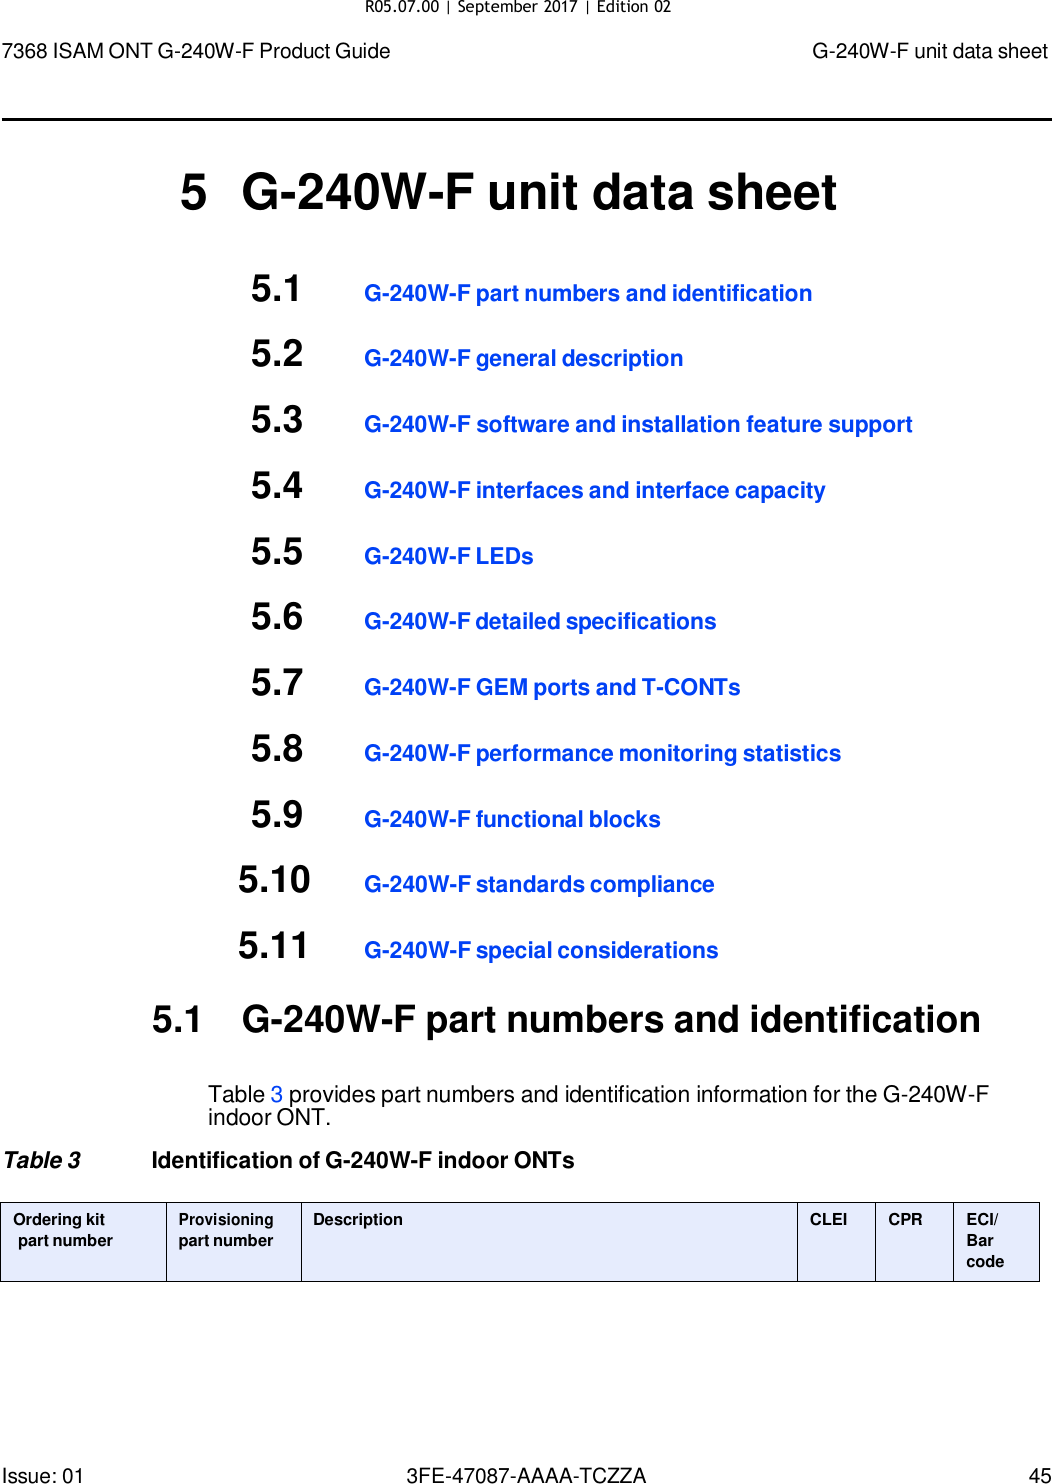 Page 41 of Nokia Bell G240WFV2 7368 ISAM GPON ONU User Manual 7368 ISAM ONT G 240W F Product Guide